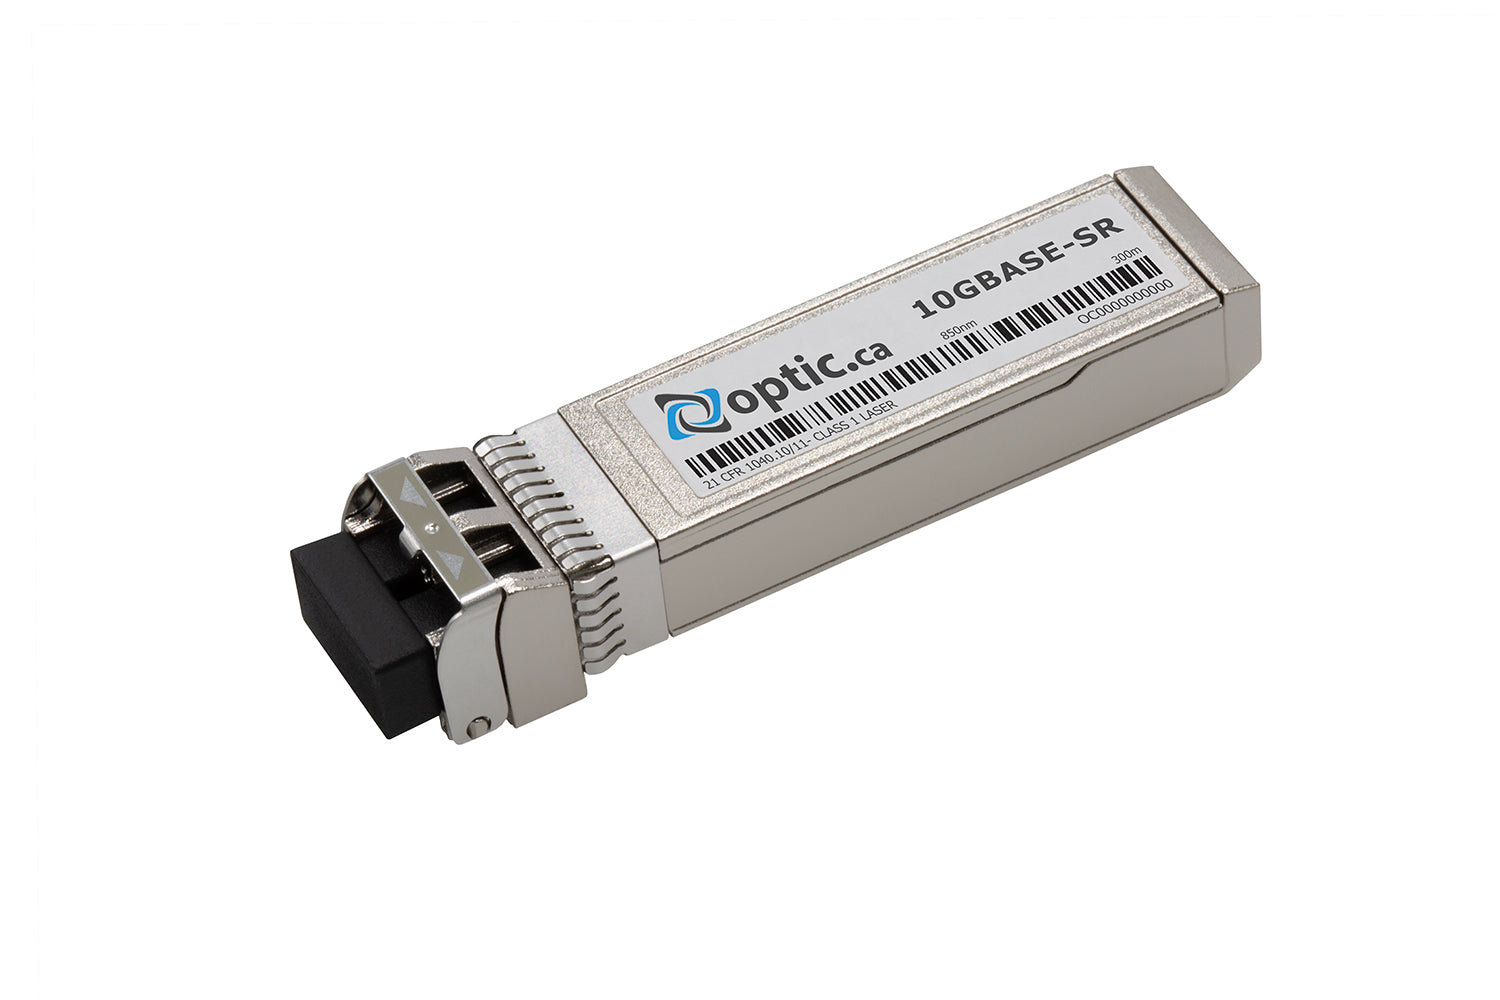 OPTIC.CA - 10GBASE-SR SFP+ - AT-SP10SR-OC - ALLIED TELESIS COMPATIBLE